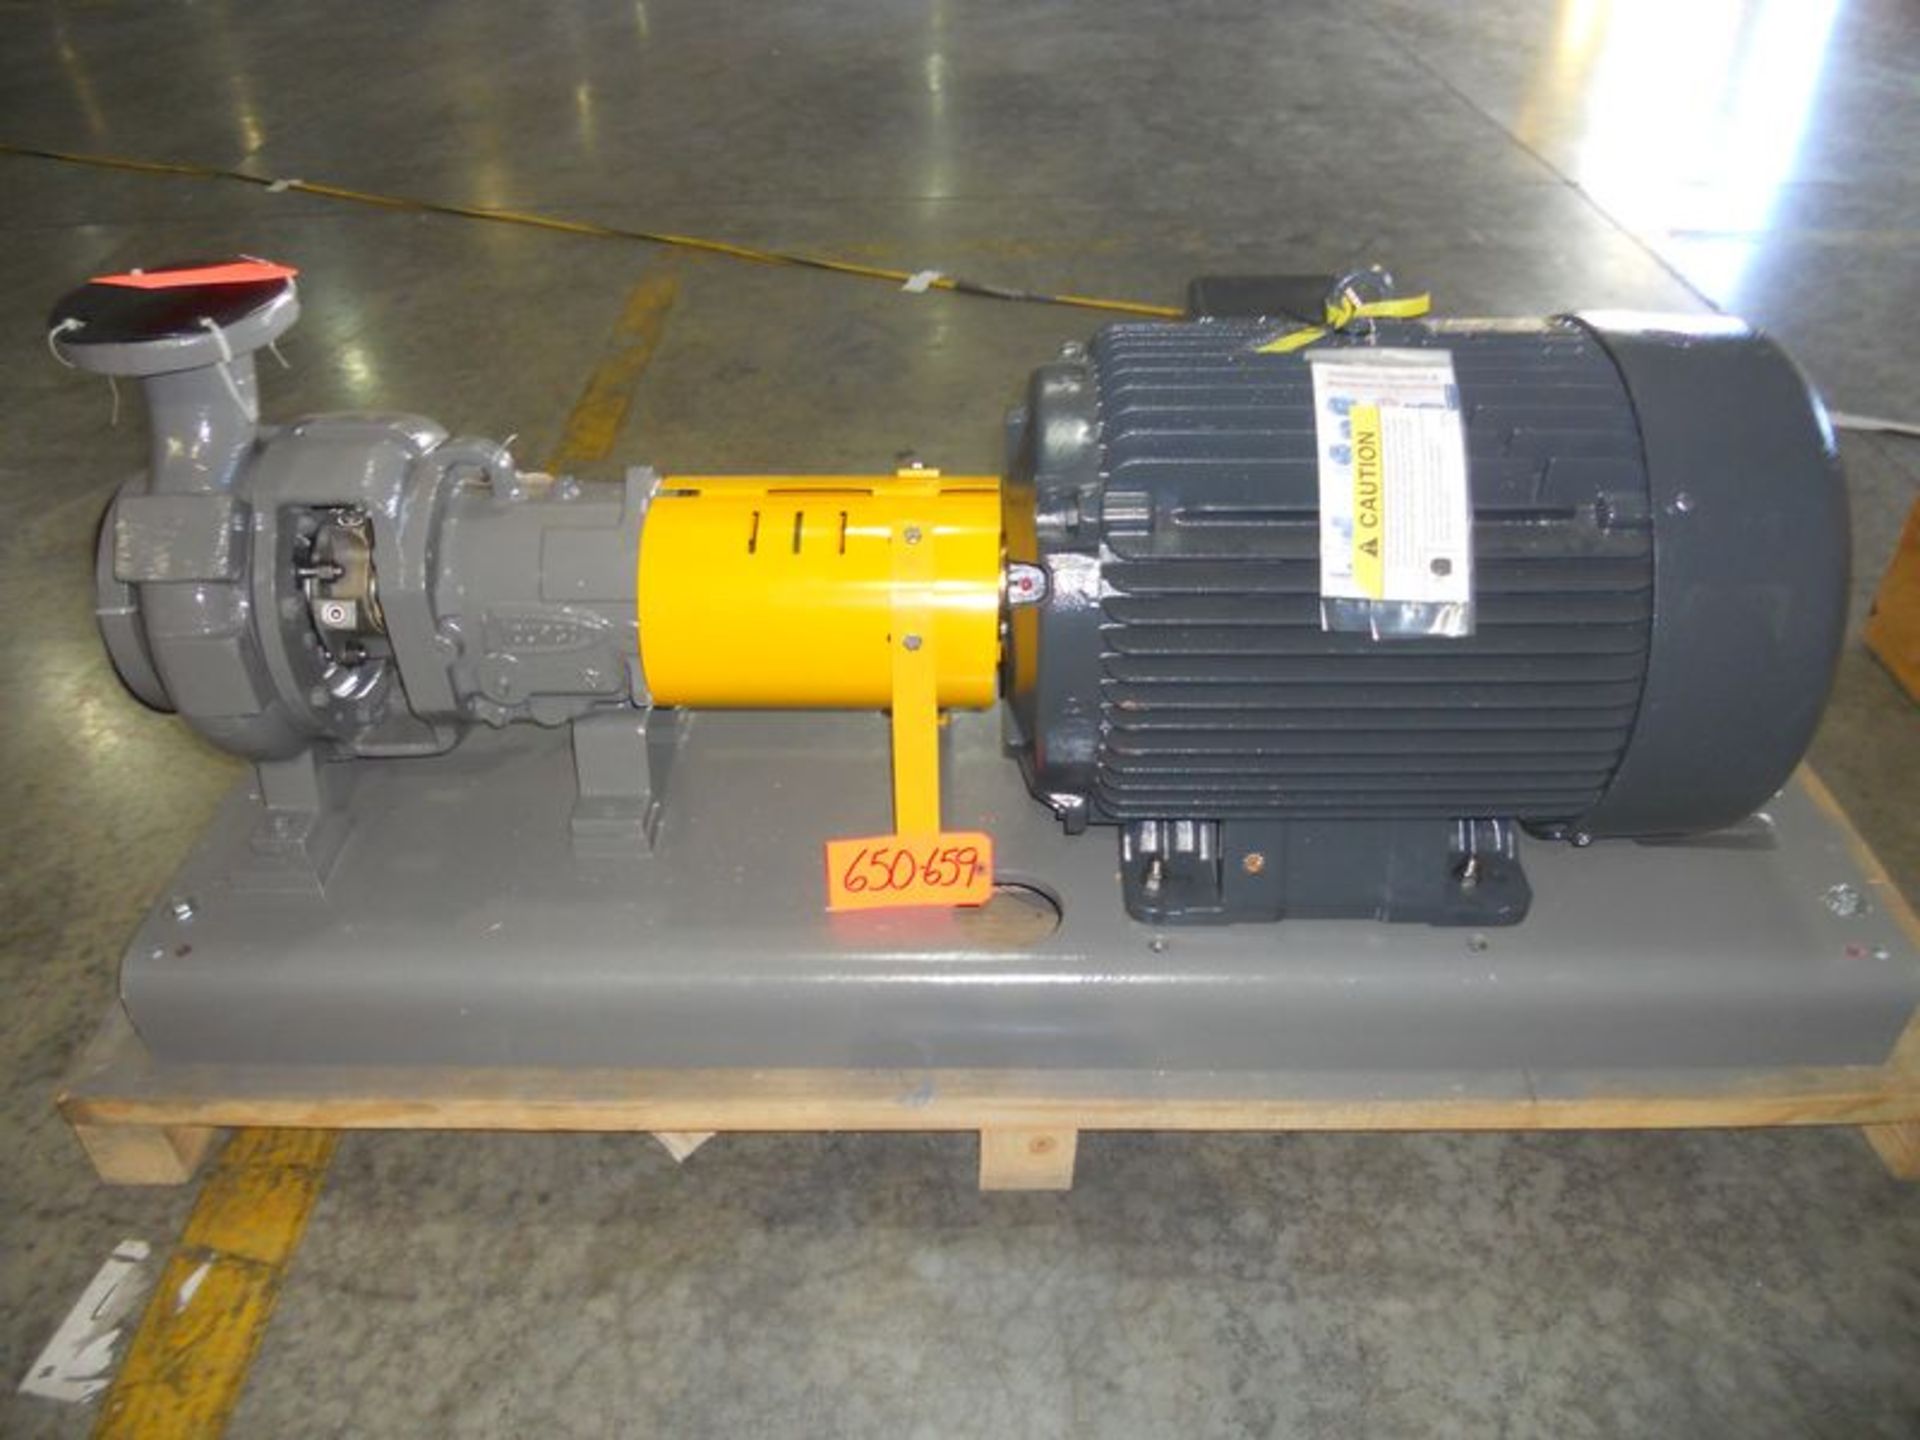 FlowServe MK3 STD centrifugal pump, S/N 0108-3590-E, 4" X 3", 60 HP, MDP 285 psi @ 100 DegF, Size - Image 2 of 6